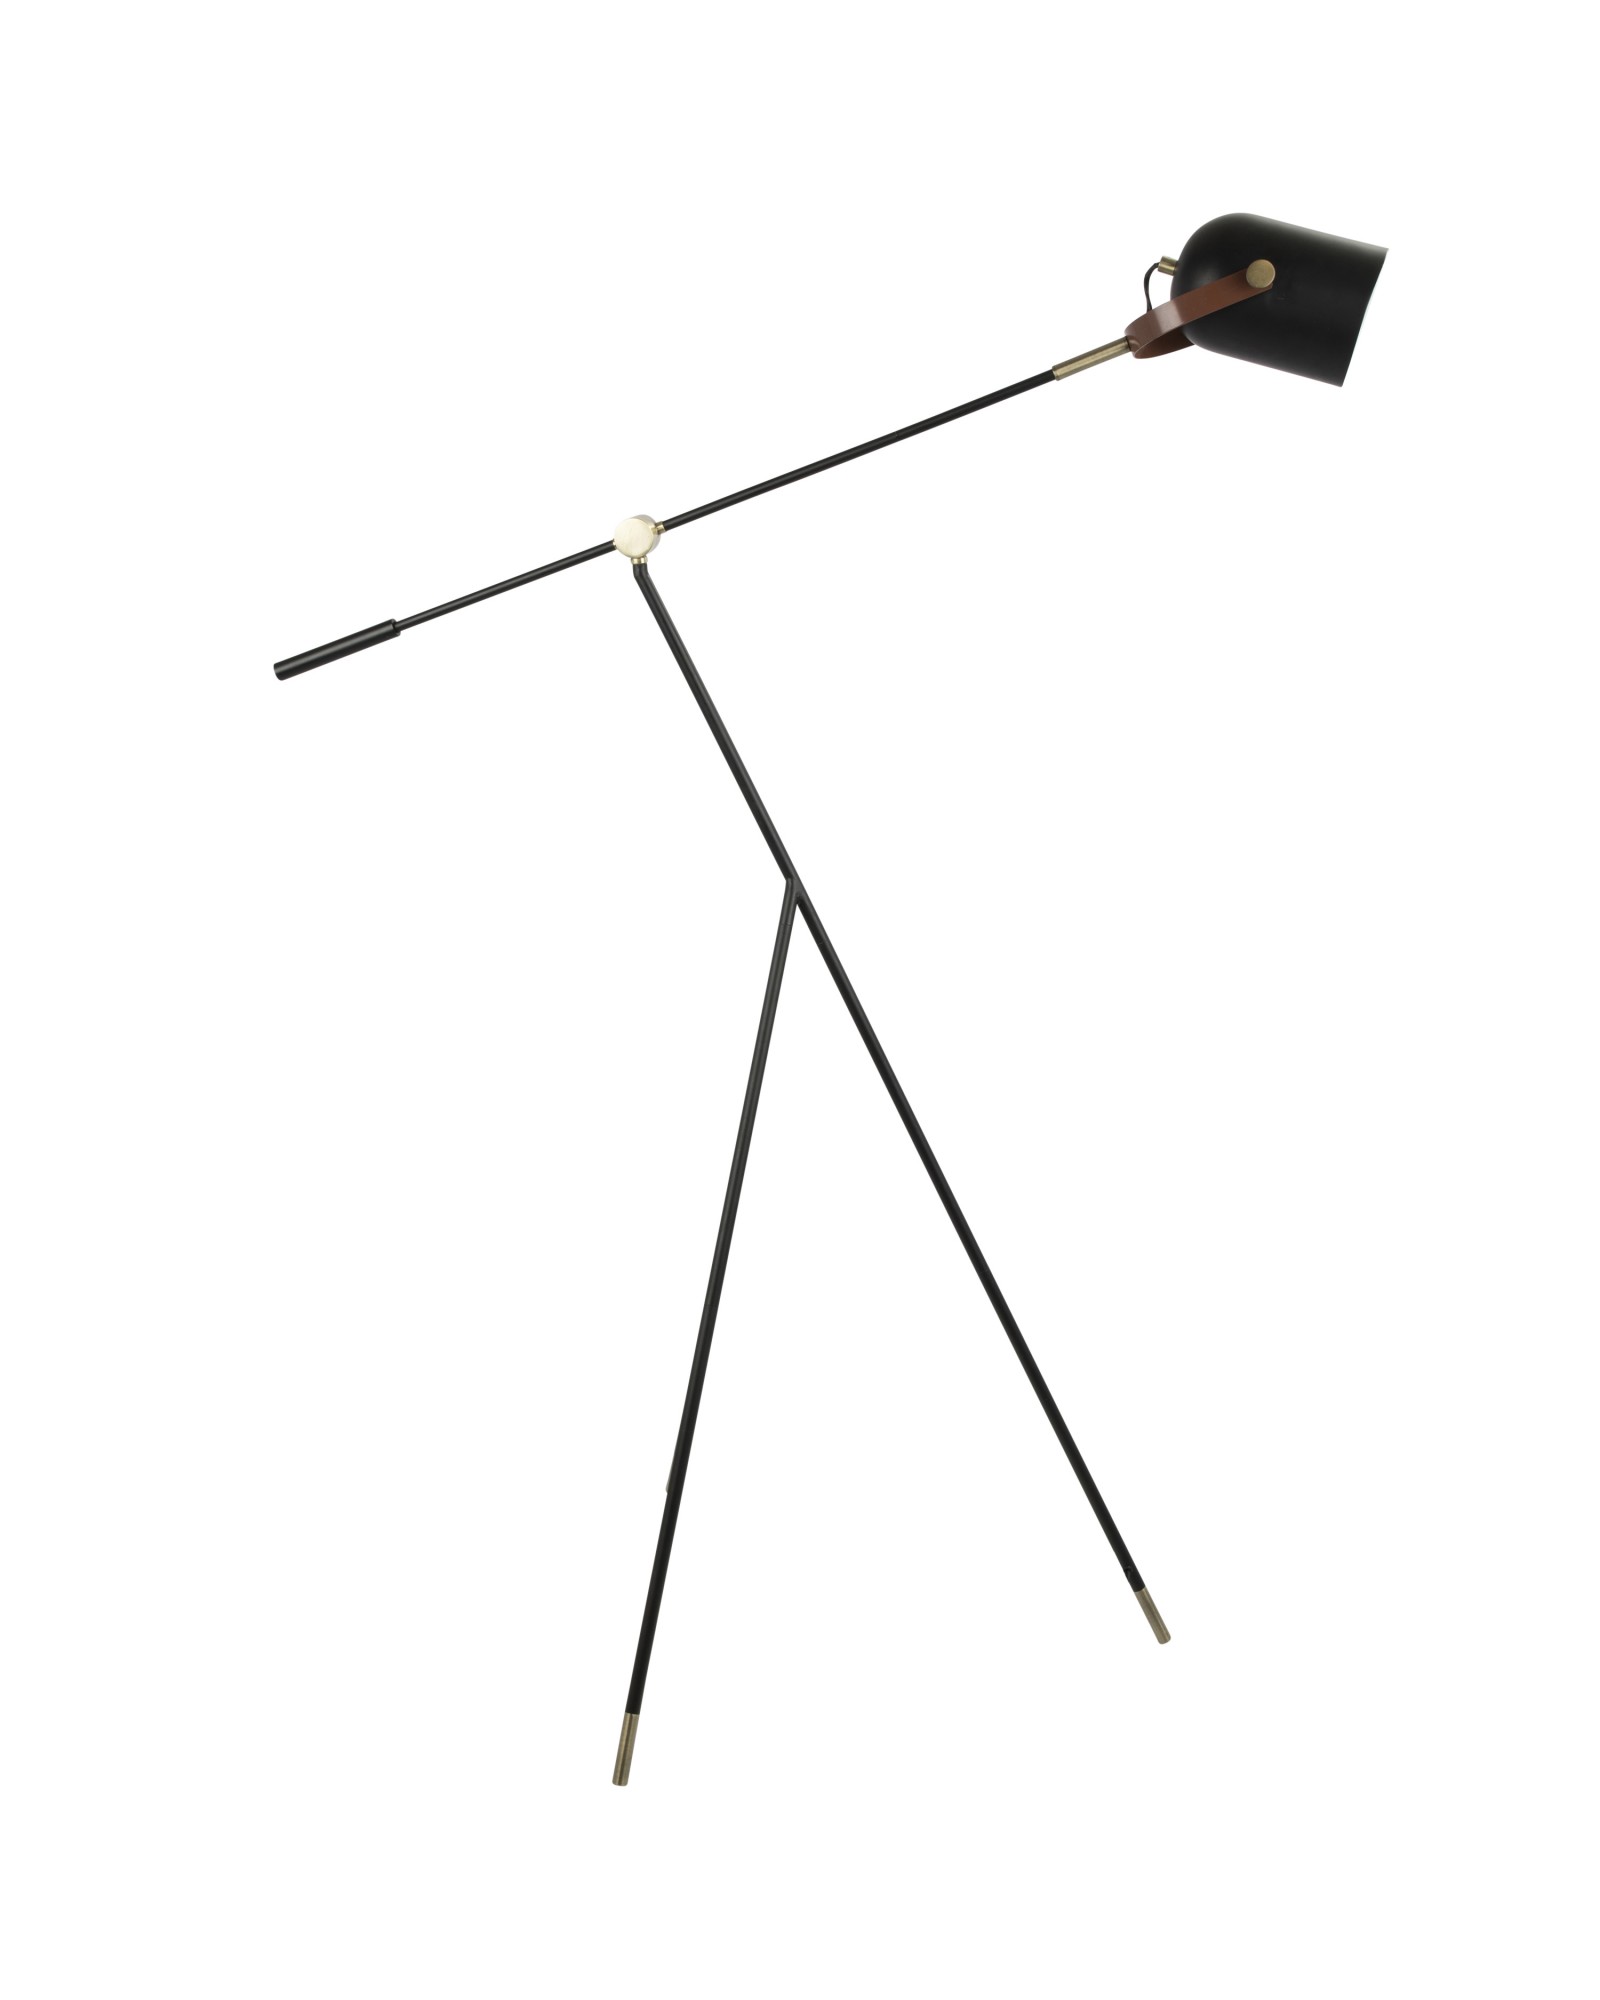 Hayward Industrial Tripod Floor Lamp in Black with Gold Accents